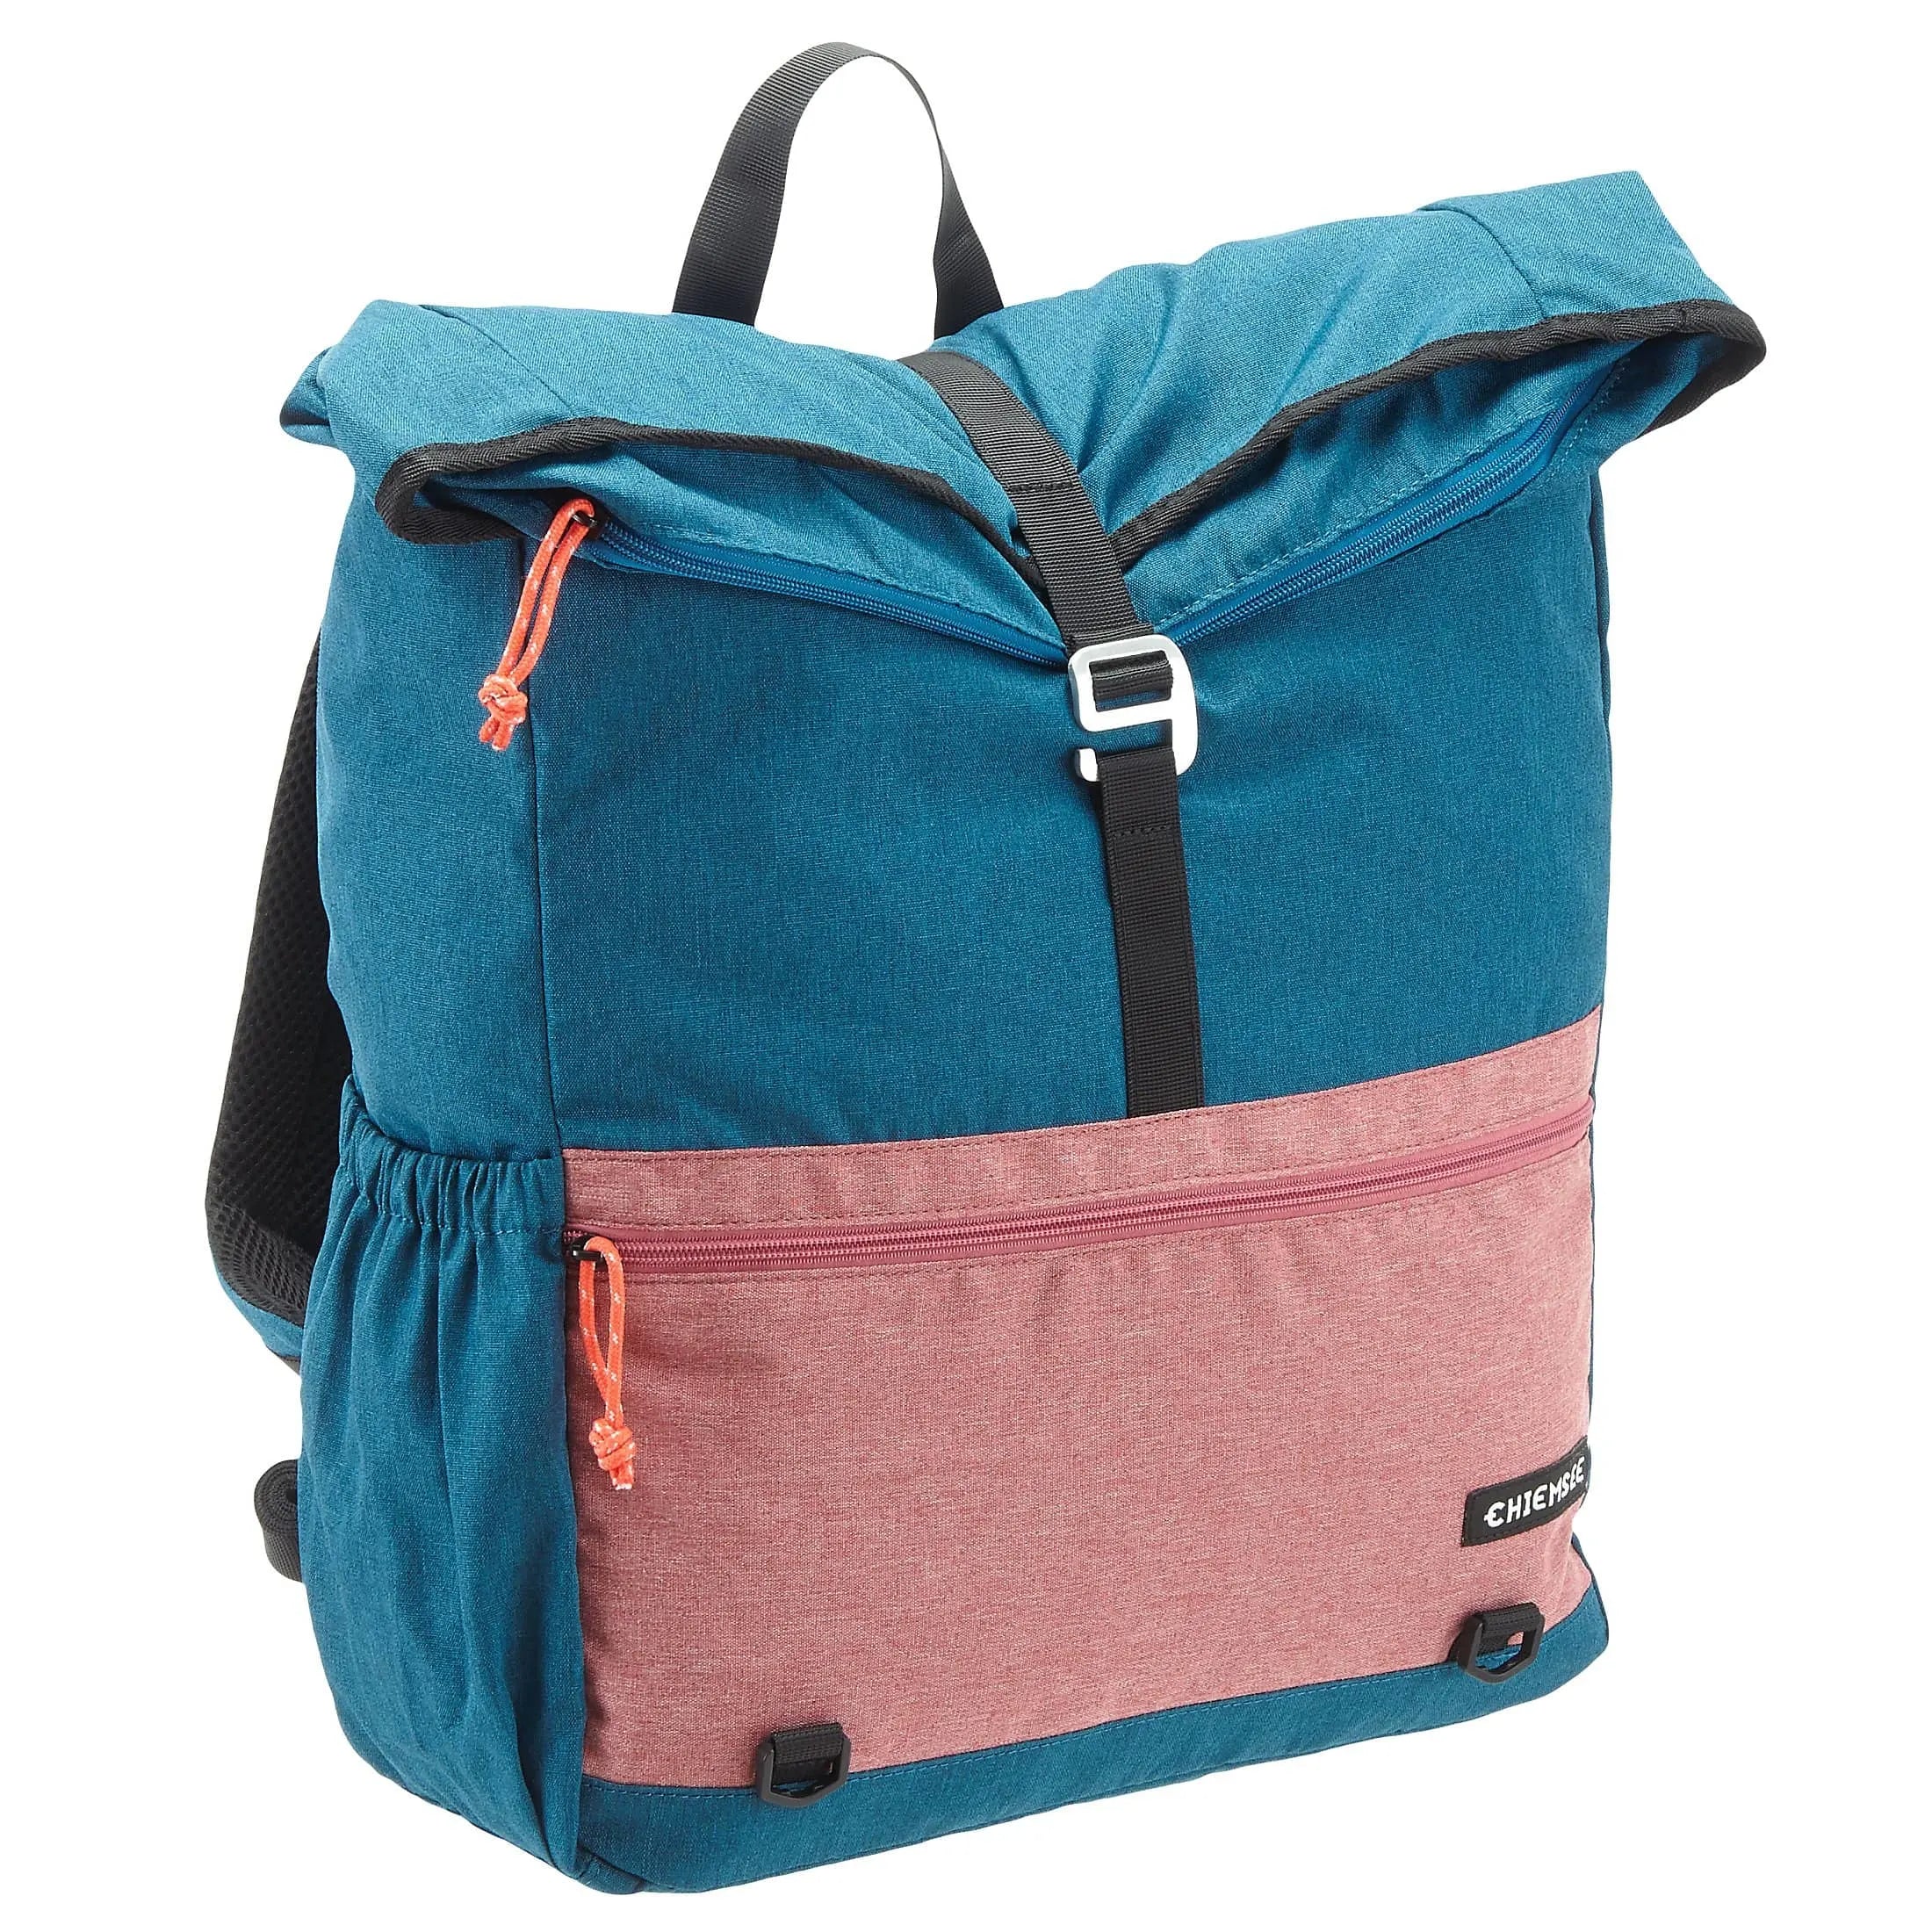 Chiemsee Sports & Travel Bags Casual Rucksack 40 cm - coronet blue